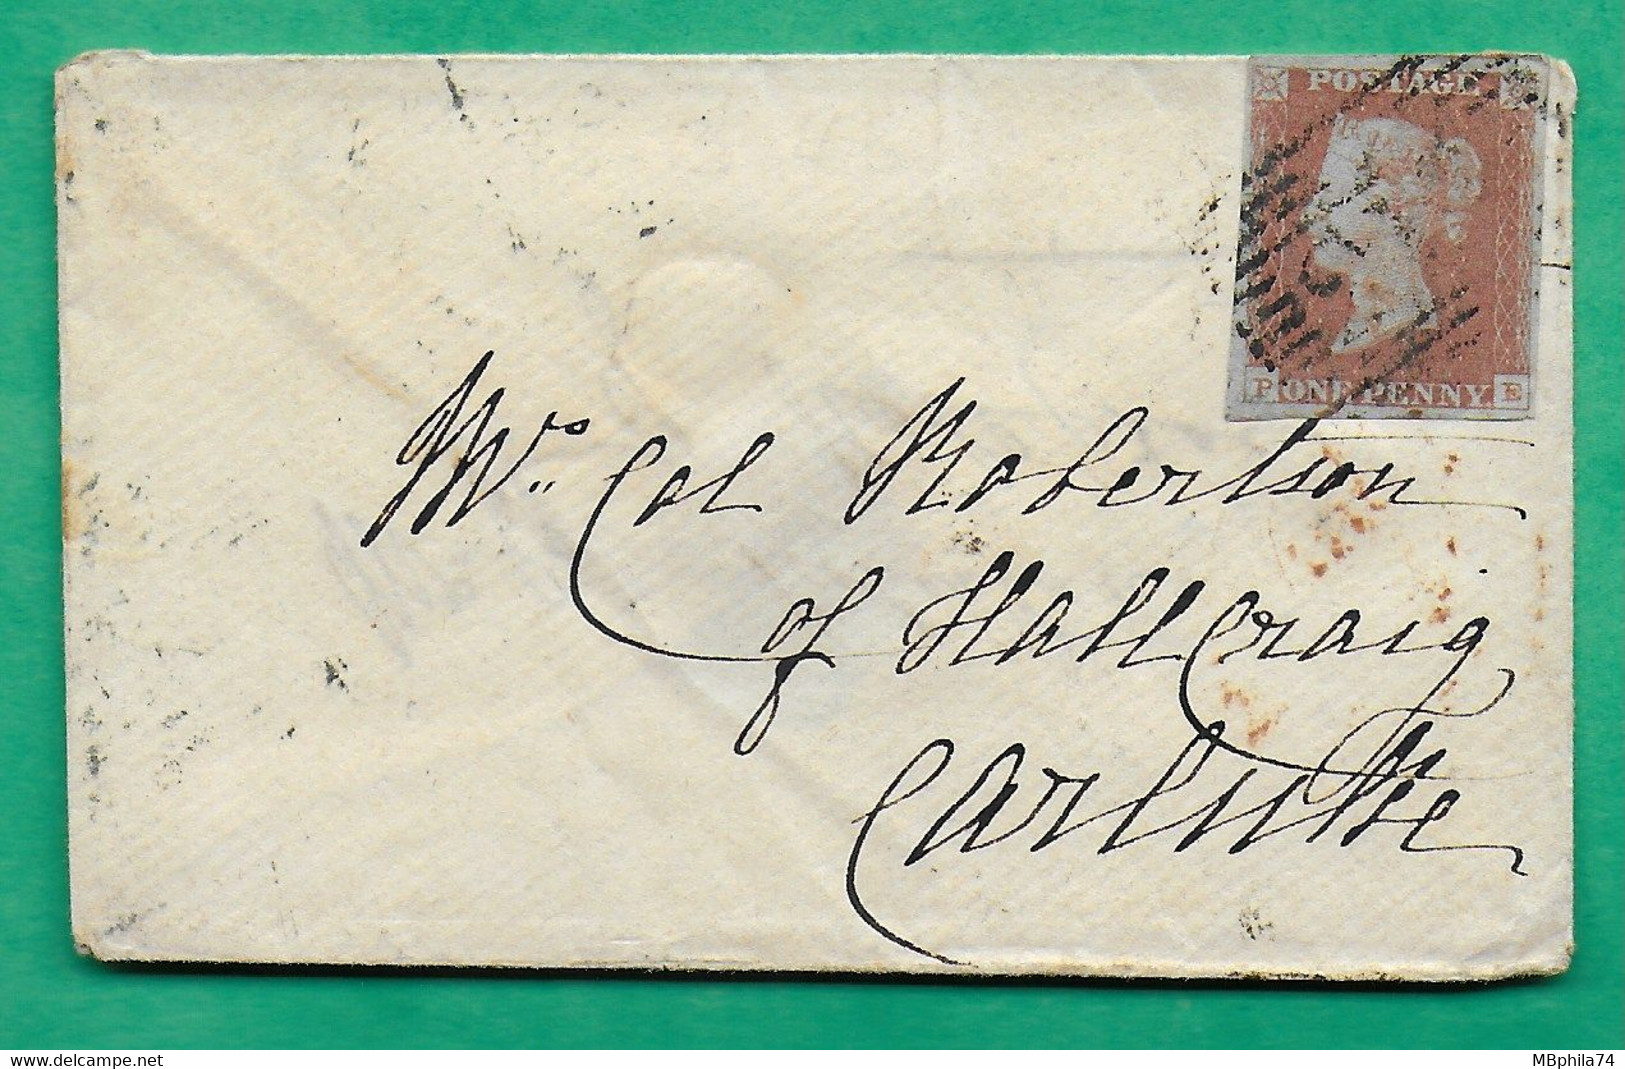 N°3 ONE PENNY RED VICTORIA HAMILTON ENGLAND FOR CARLISLE ? 1848 - Covers & Documents